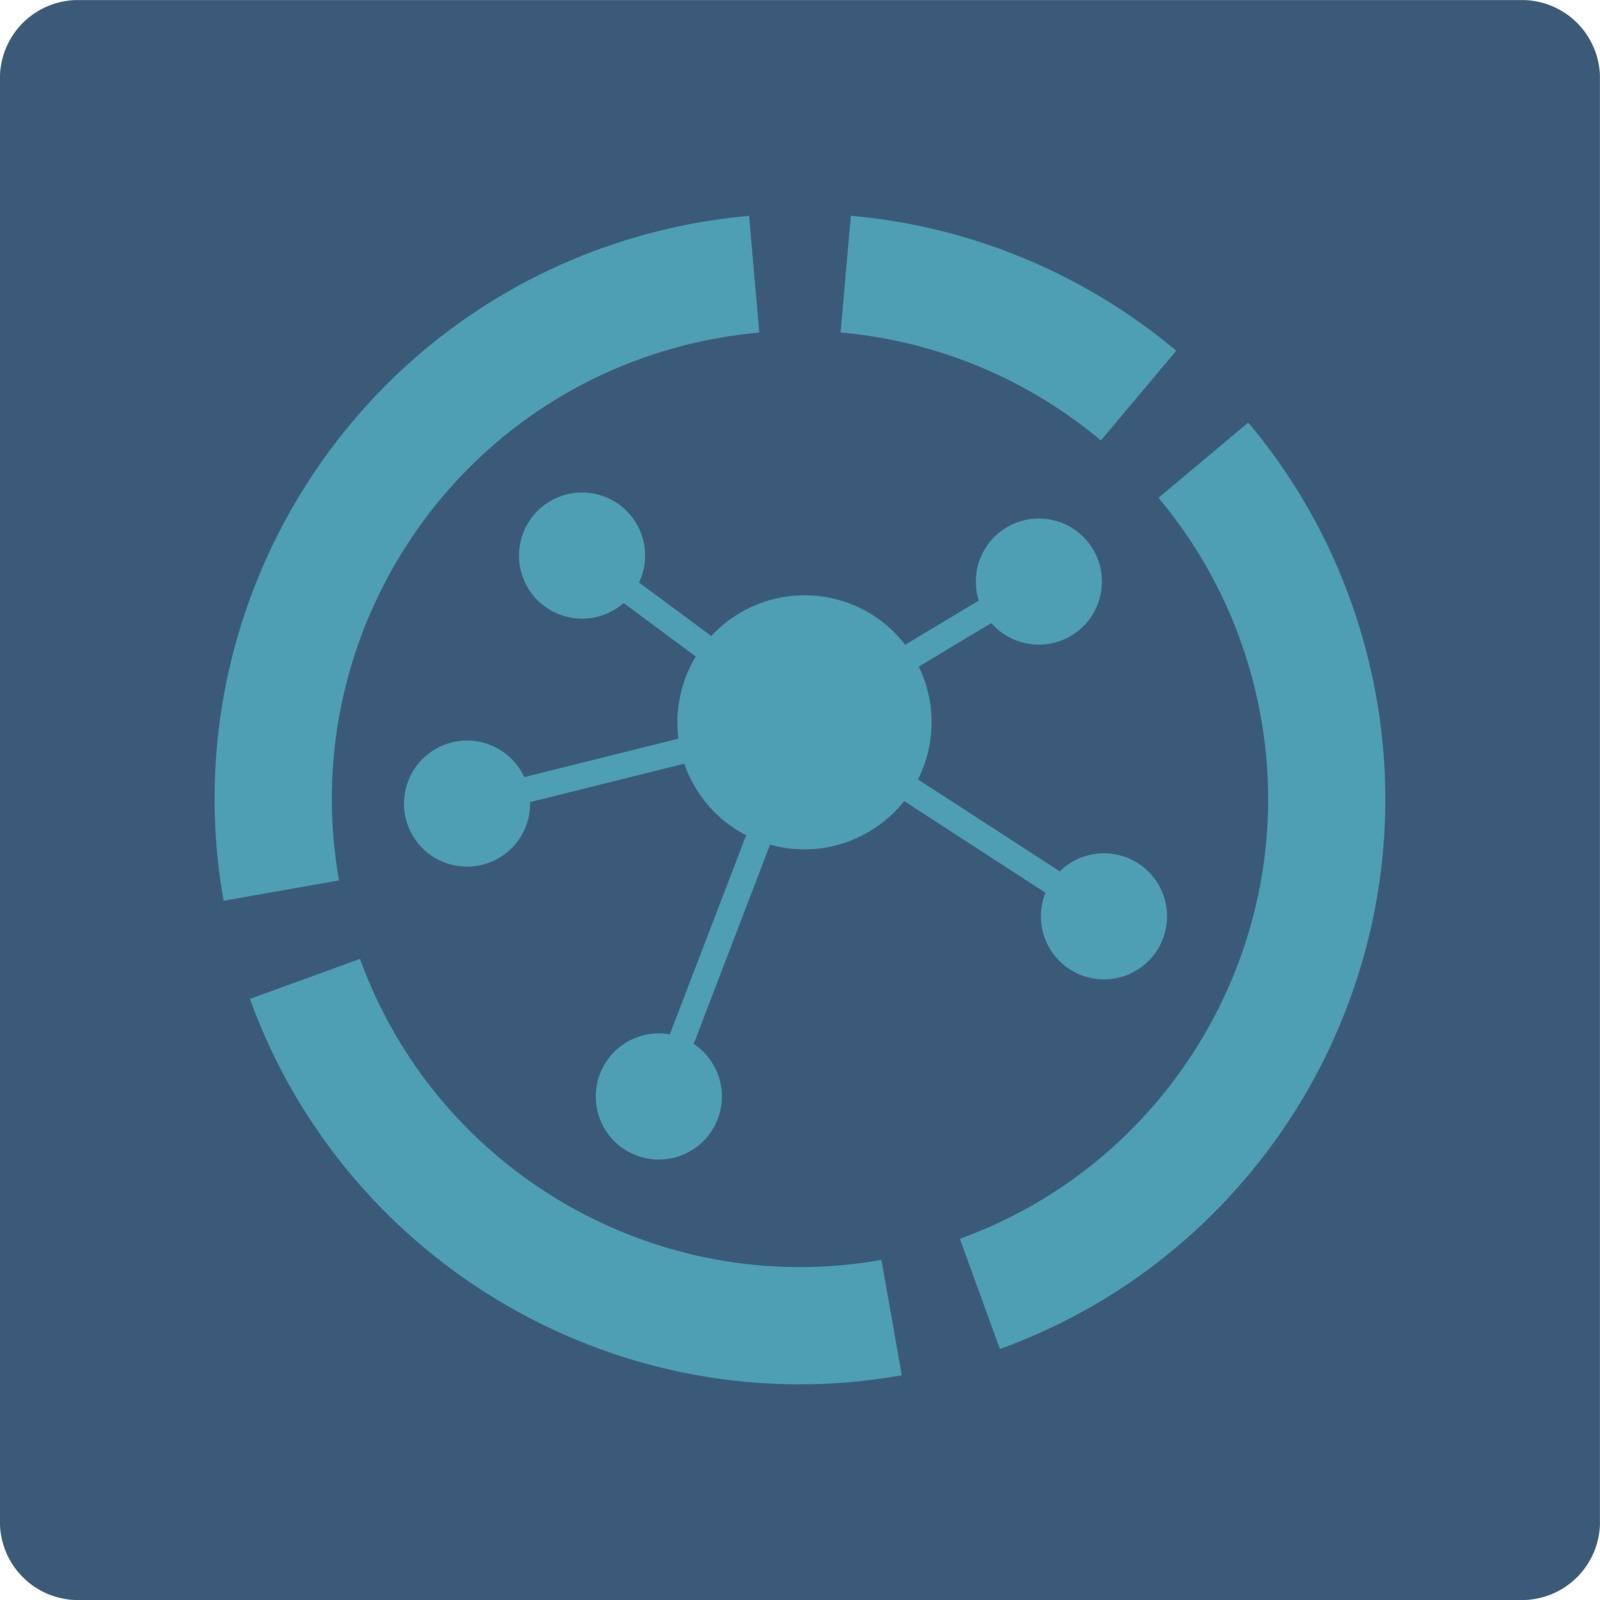 Connections diagram icon by ahasoft